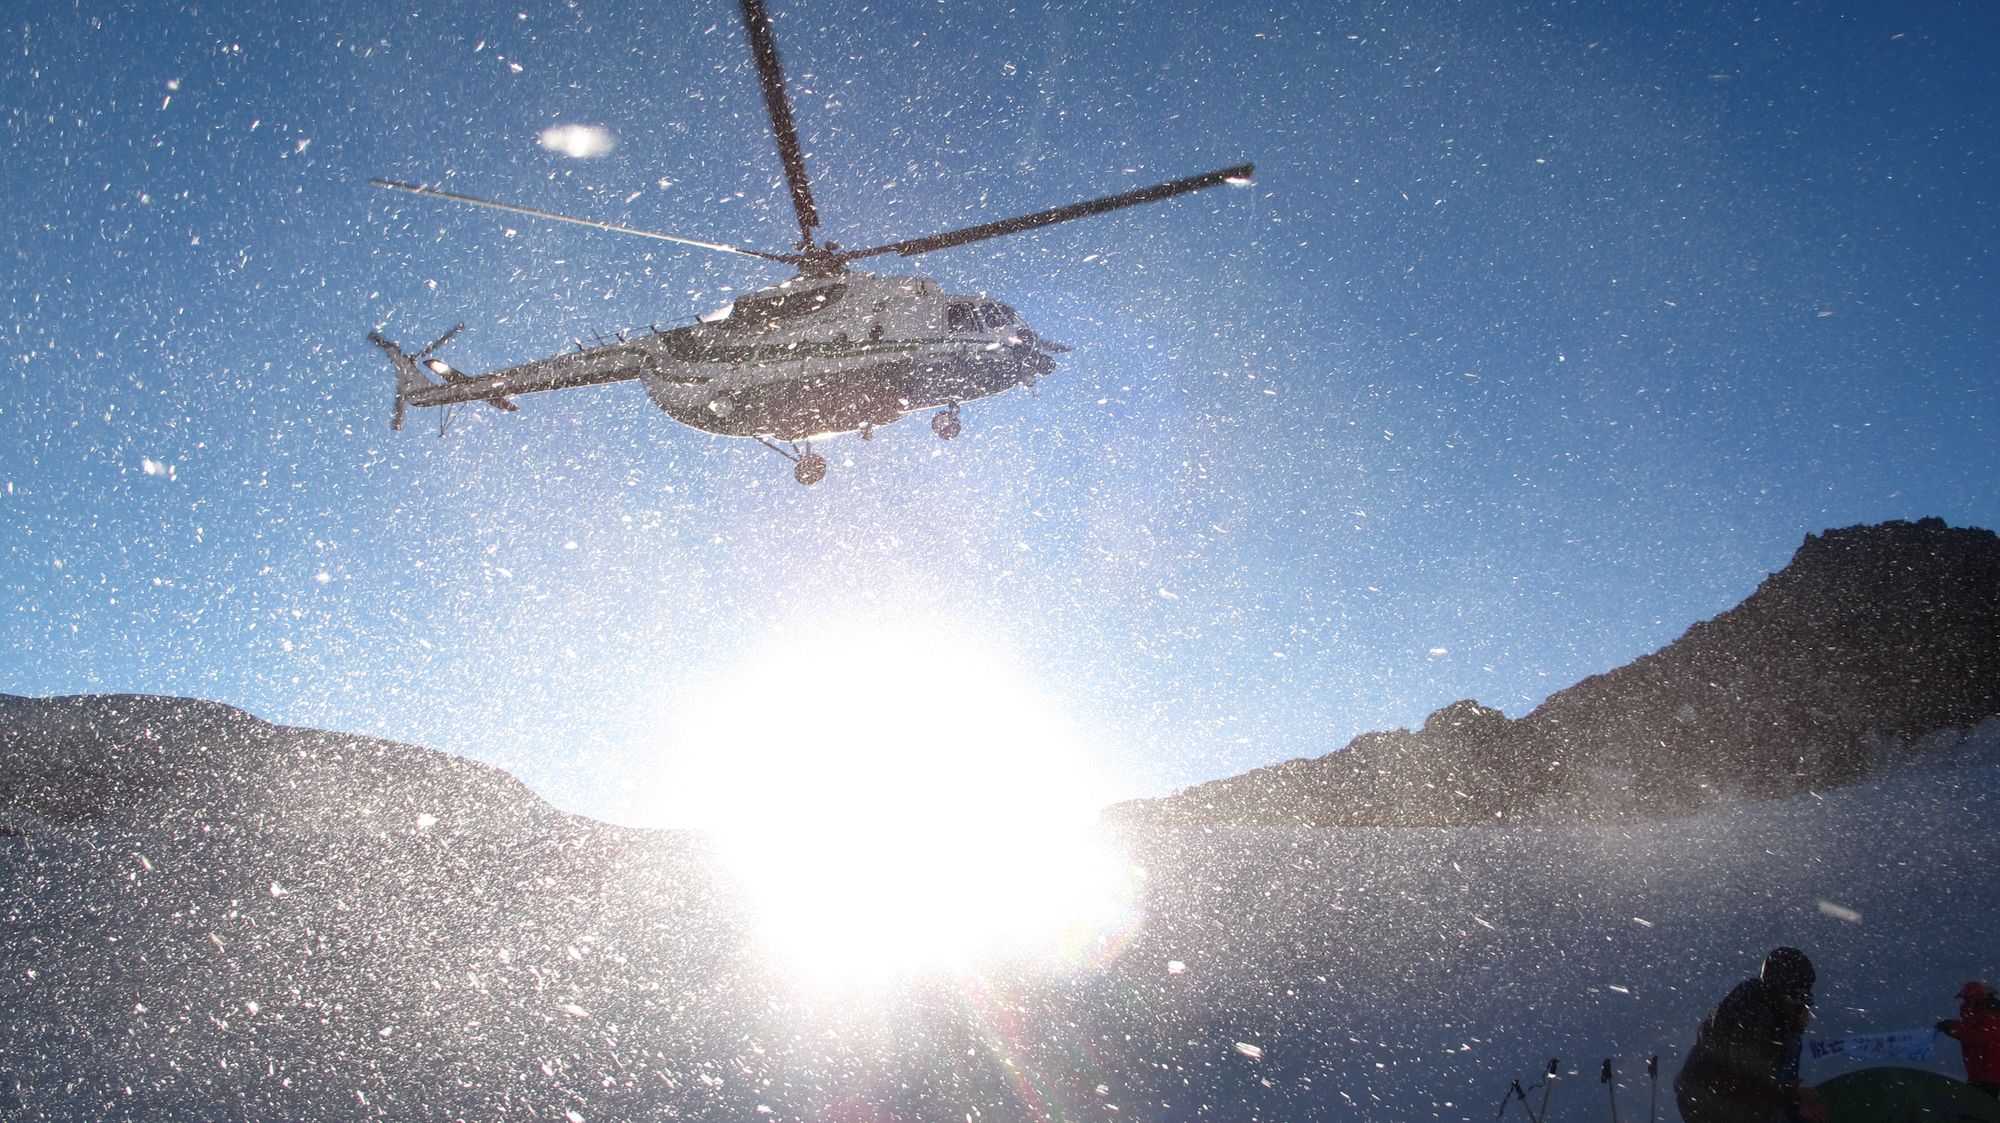 The helicopter was terrifying, but it was the harbinger of more than just wind and flying ice.